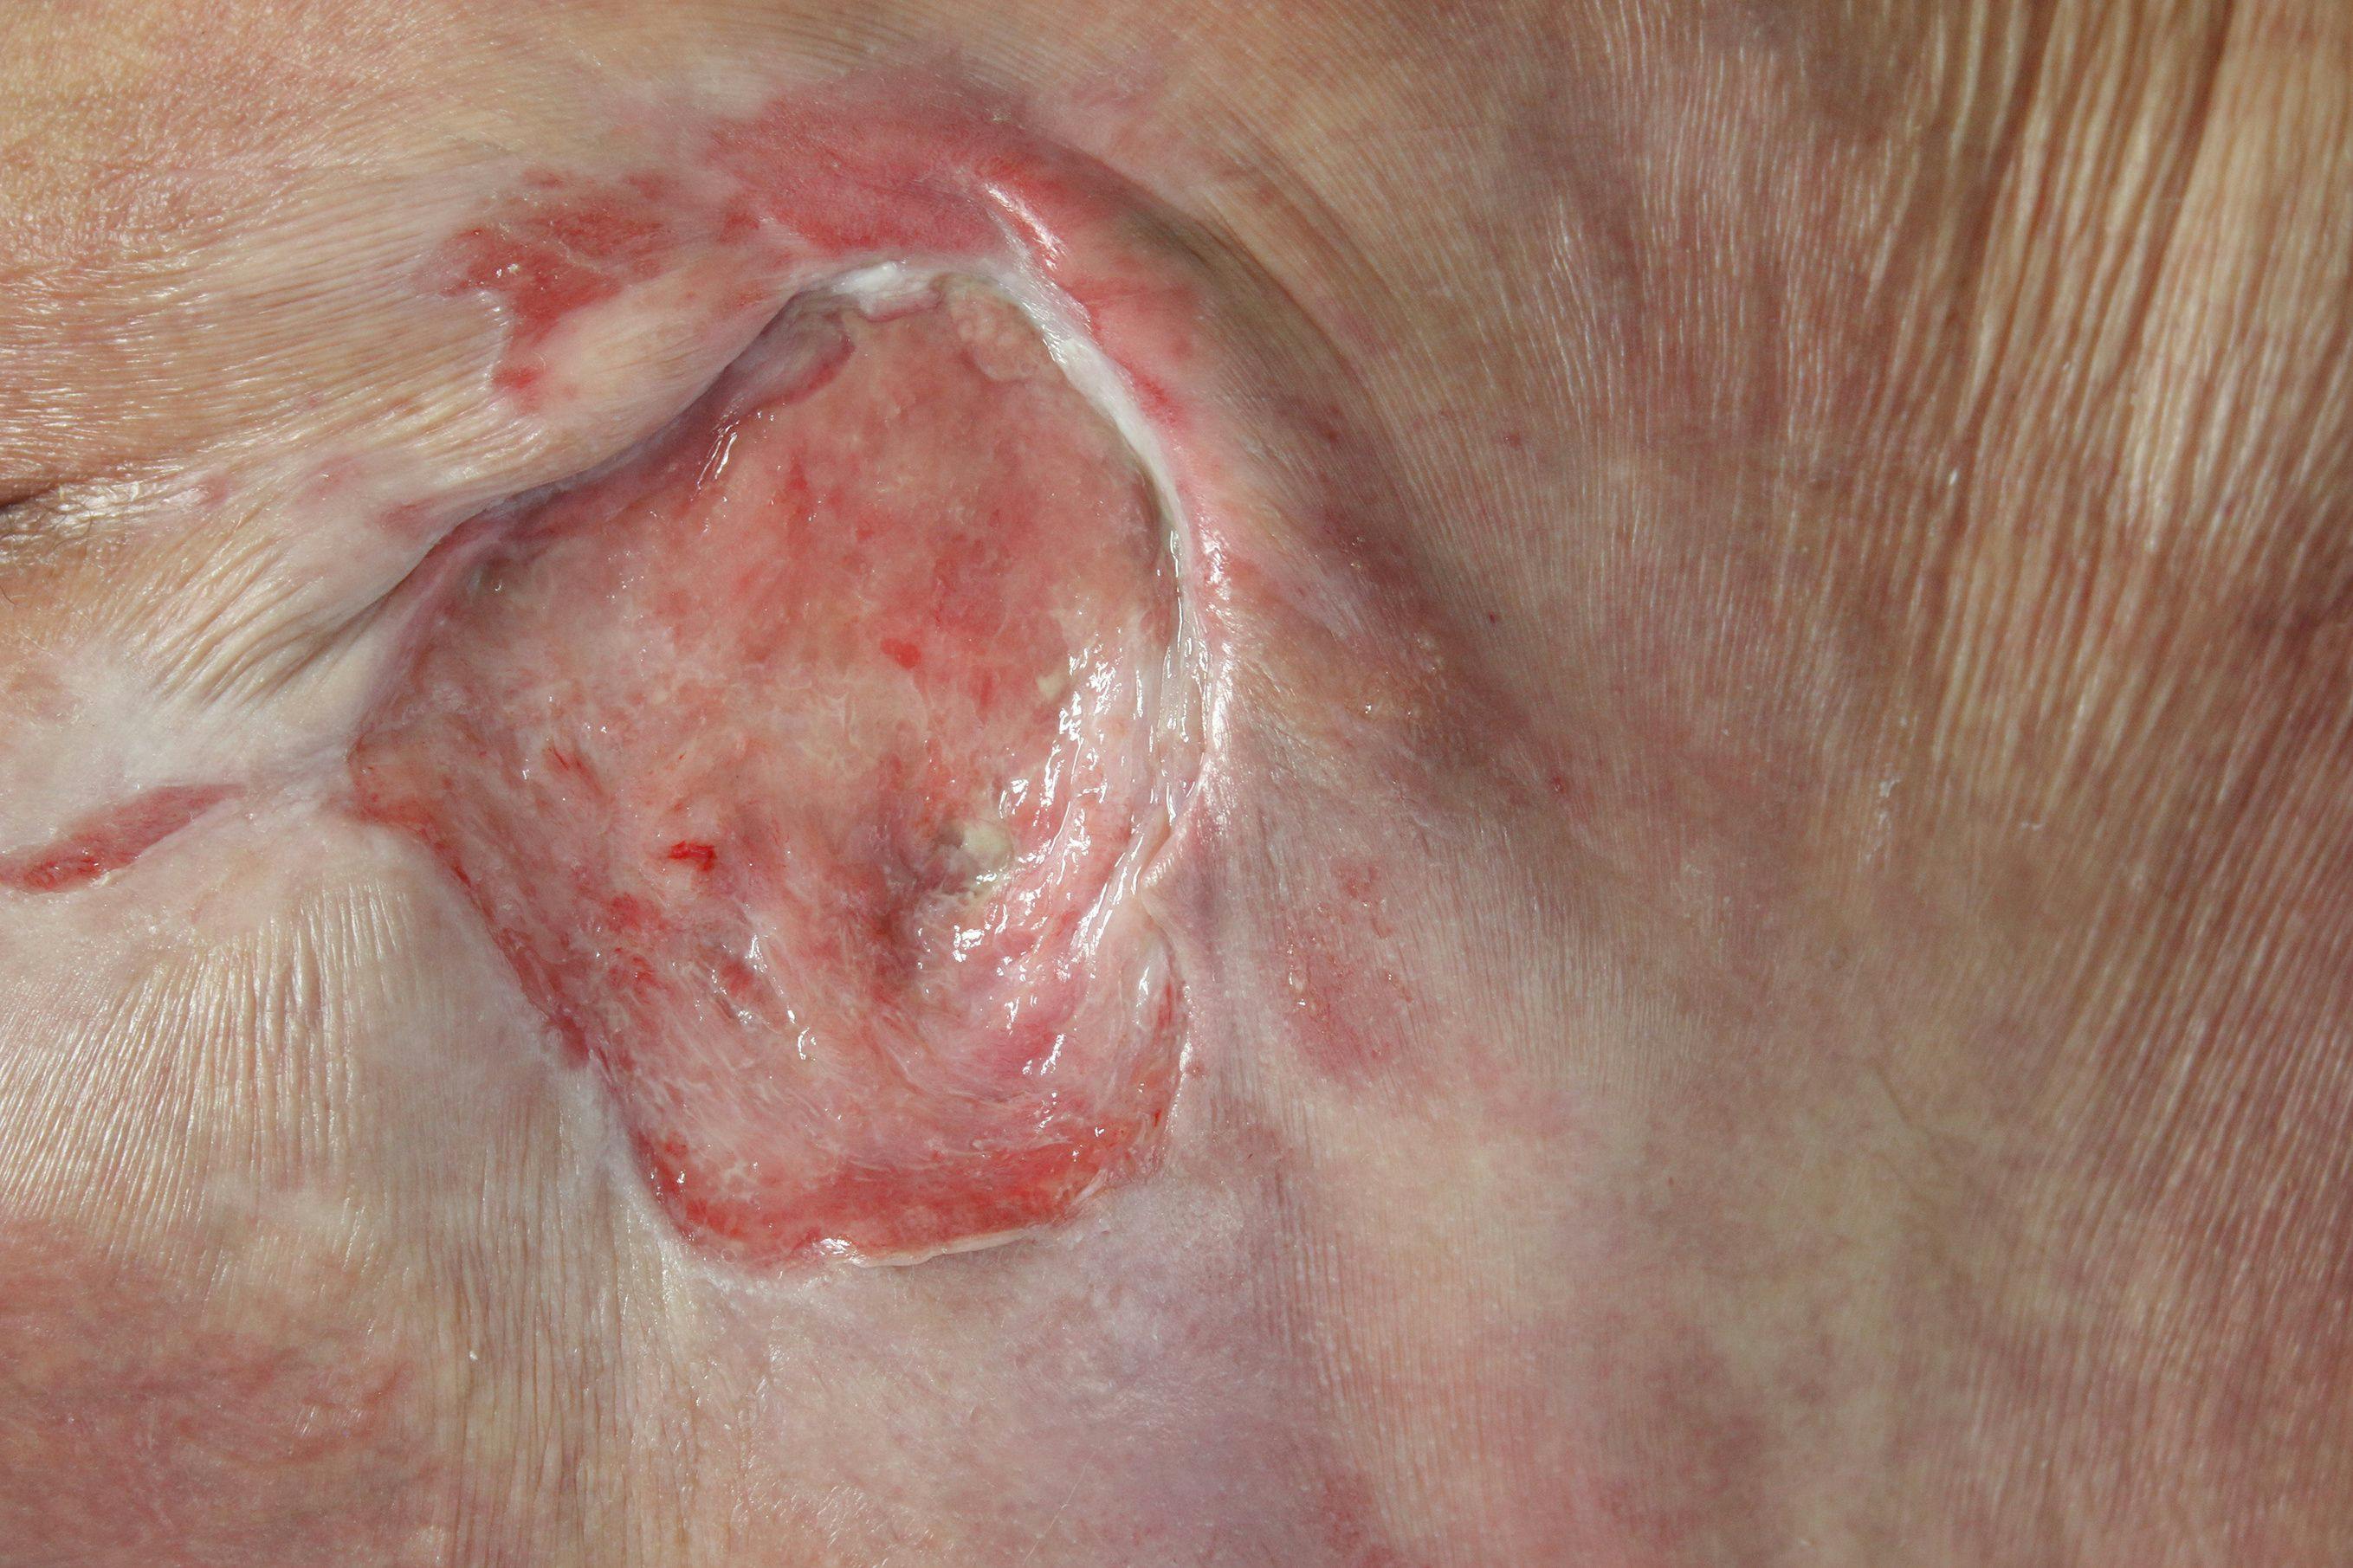 Patients With Pressure Ulcers Face Compromised Skin Parameters